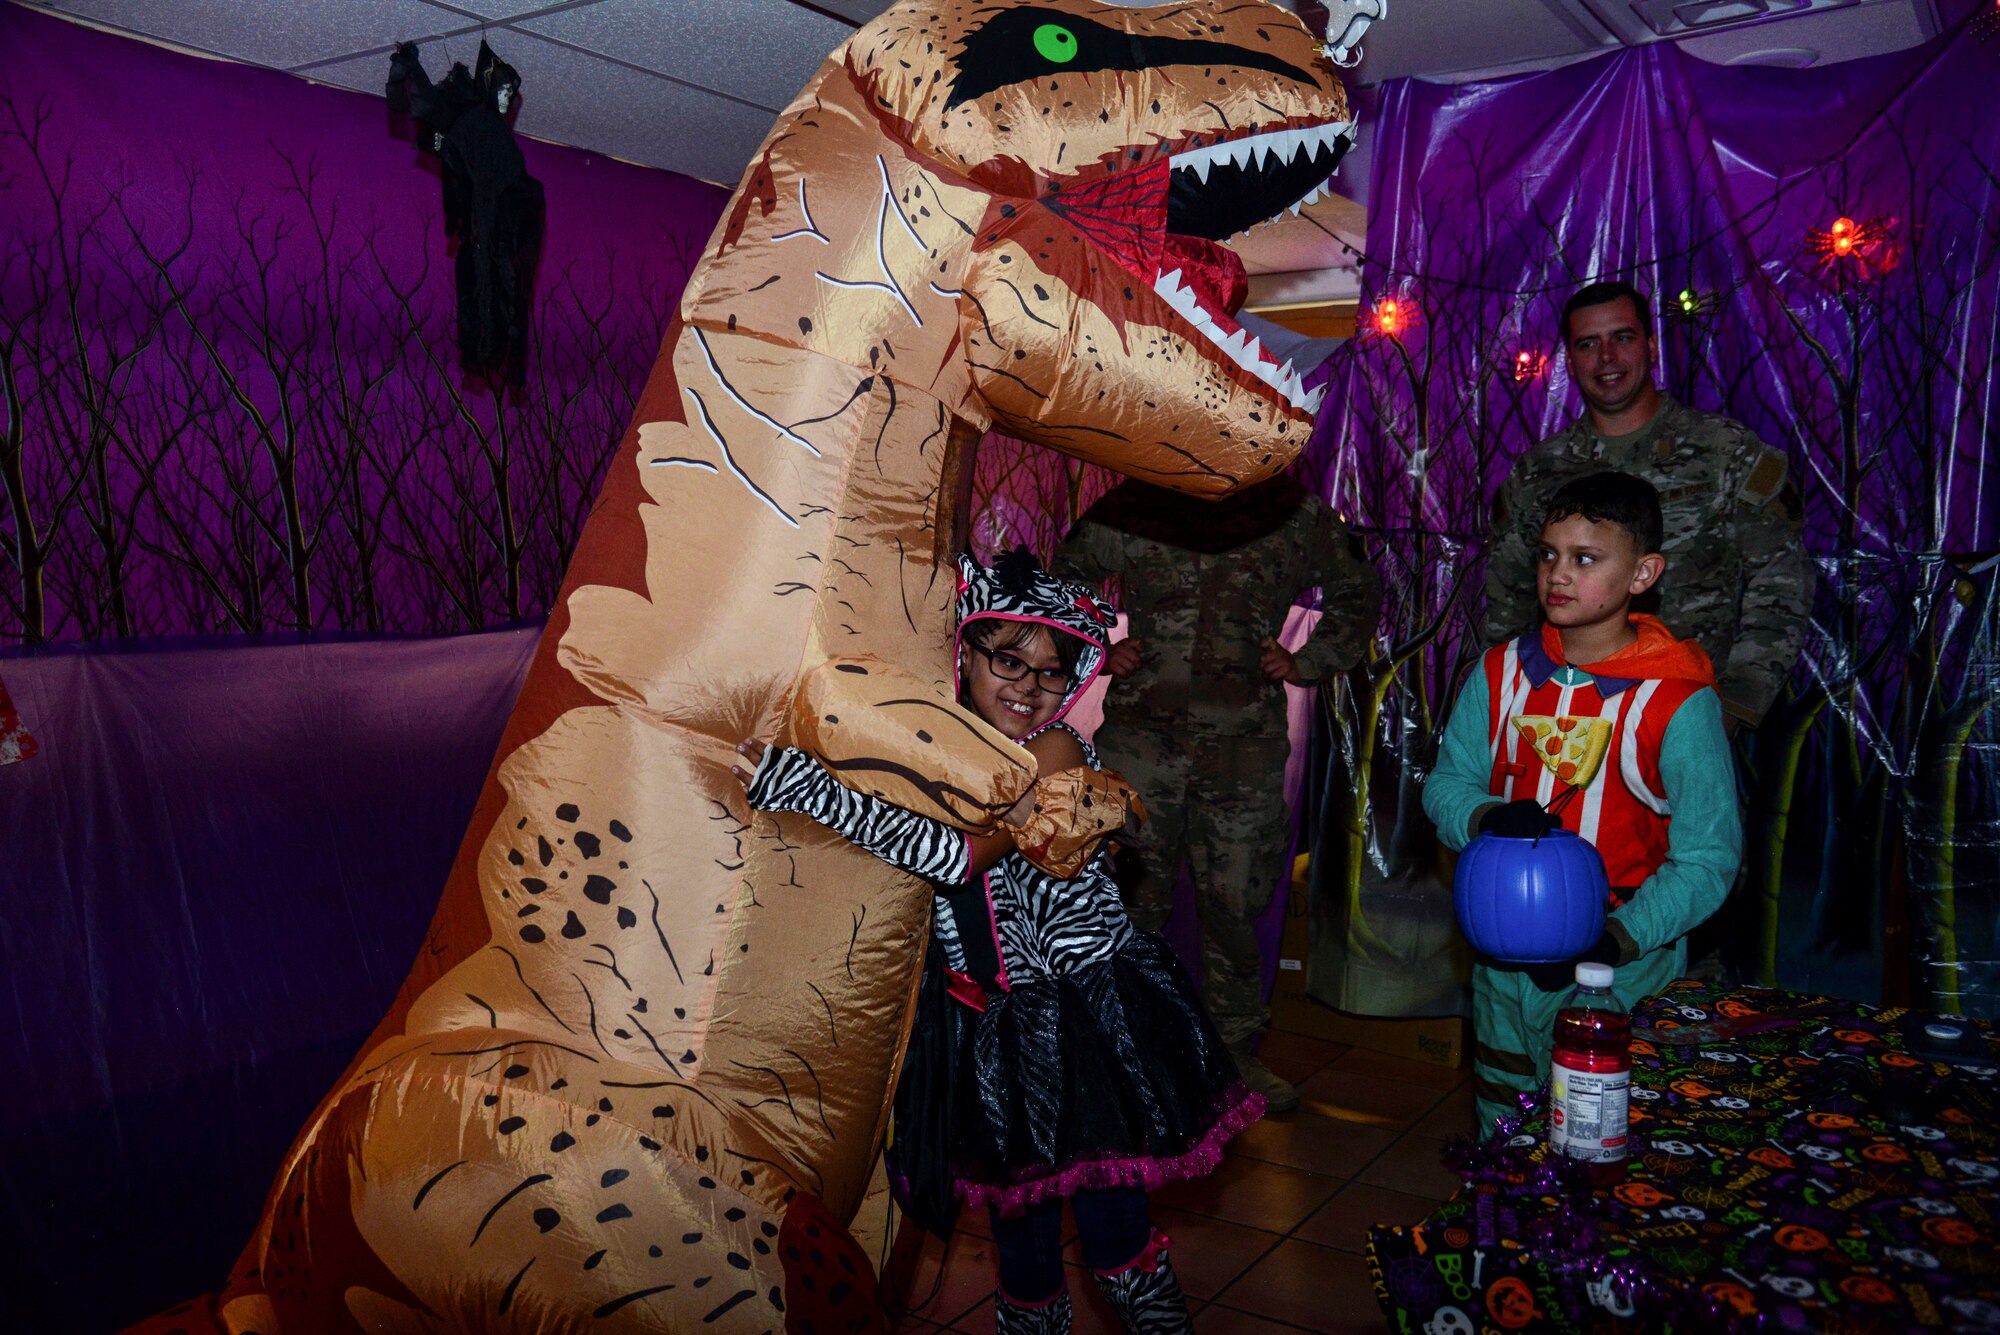 A Kirtland Elementary School student hugs a costumed dinosaur after receiving candy during a trick-or-treat event on Kirtland Air Force Base, N.M., Oct. 31, 2019. Each year, SMC invites the school to their Haunted Halloween event in which the entire building is filled with spooky decorations and hundreds of pounds of candy are passed out to costumed visitors.